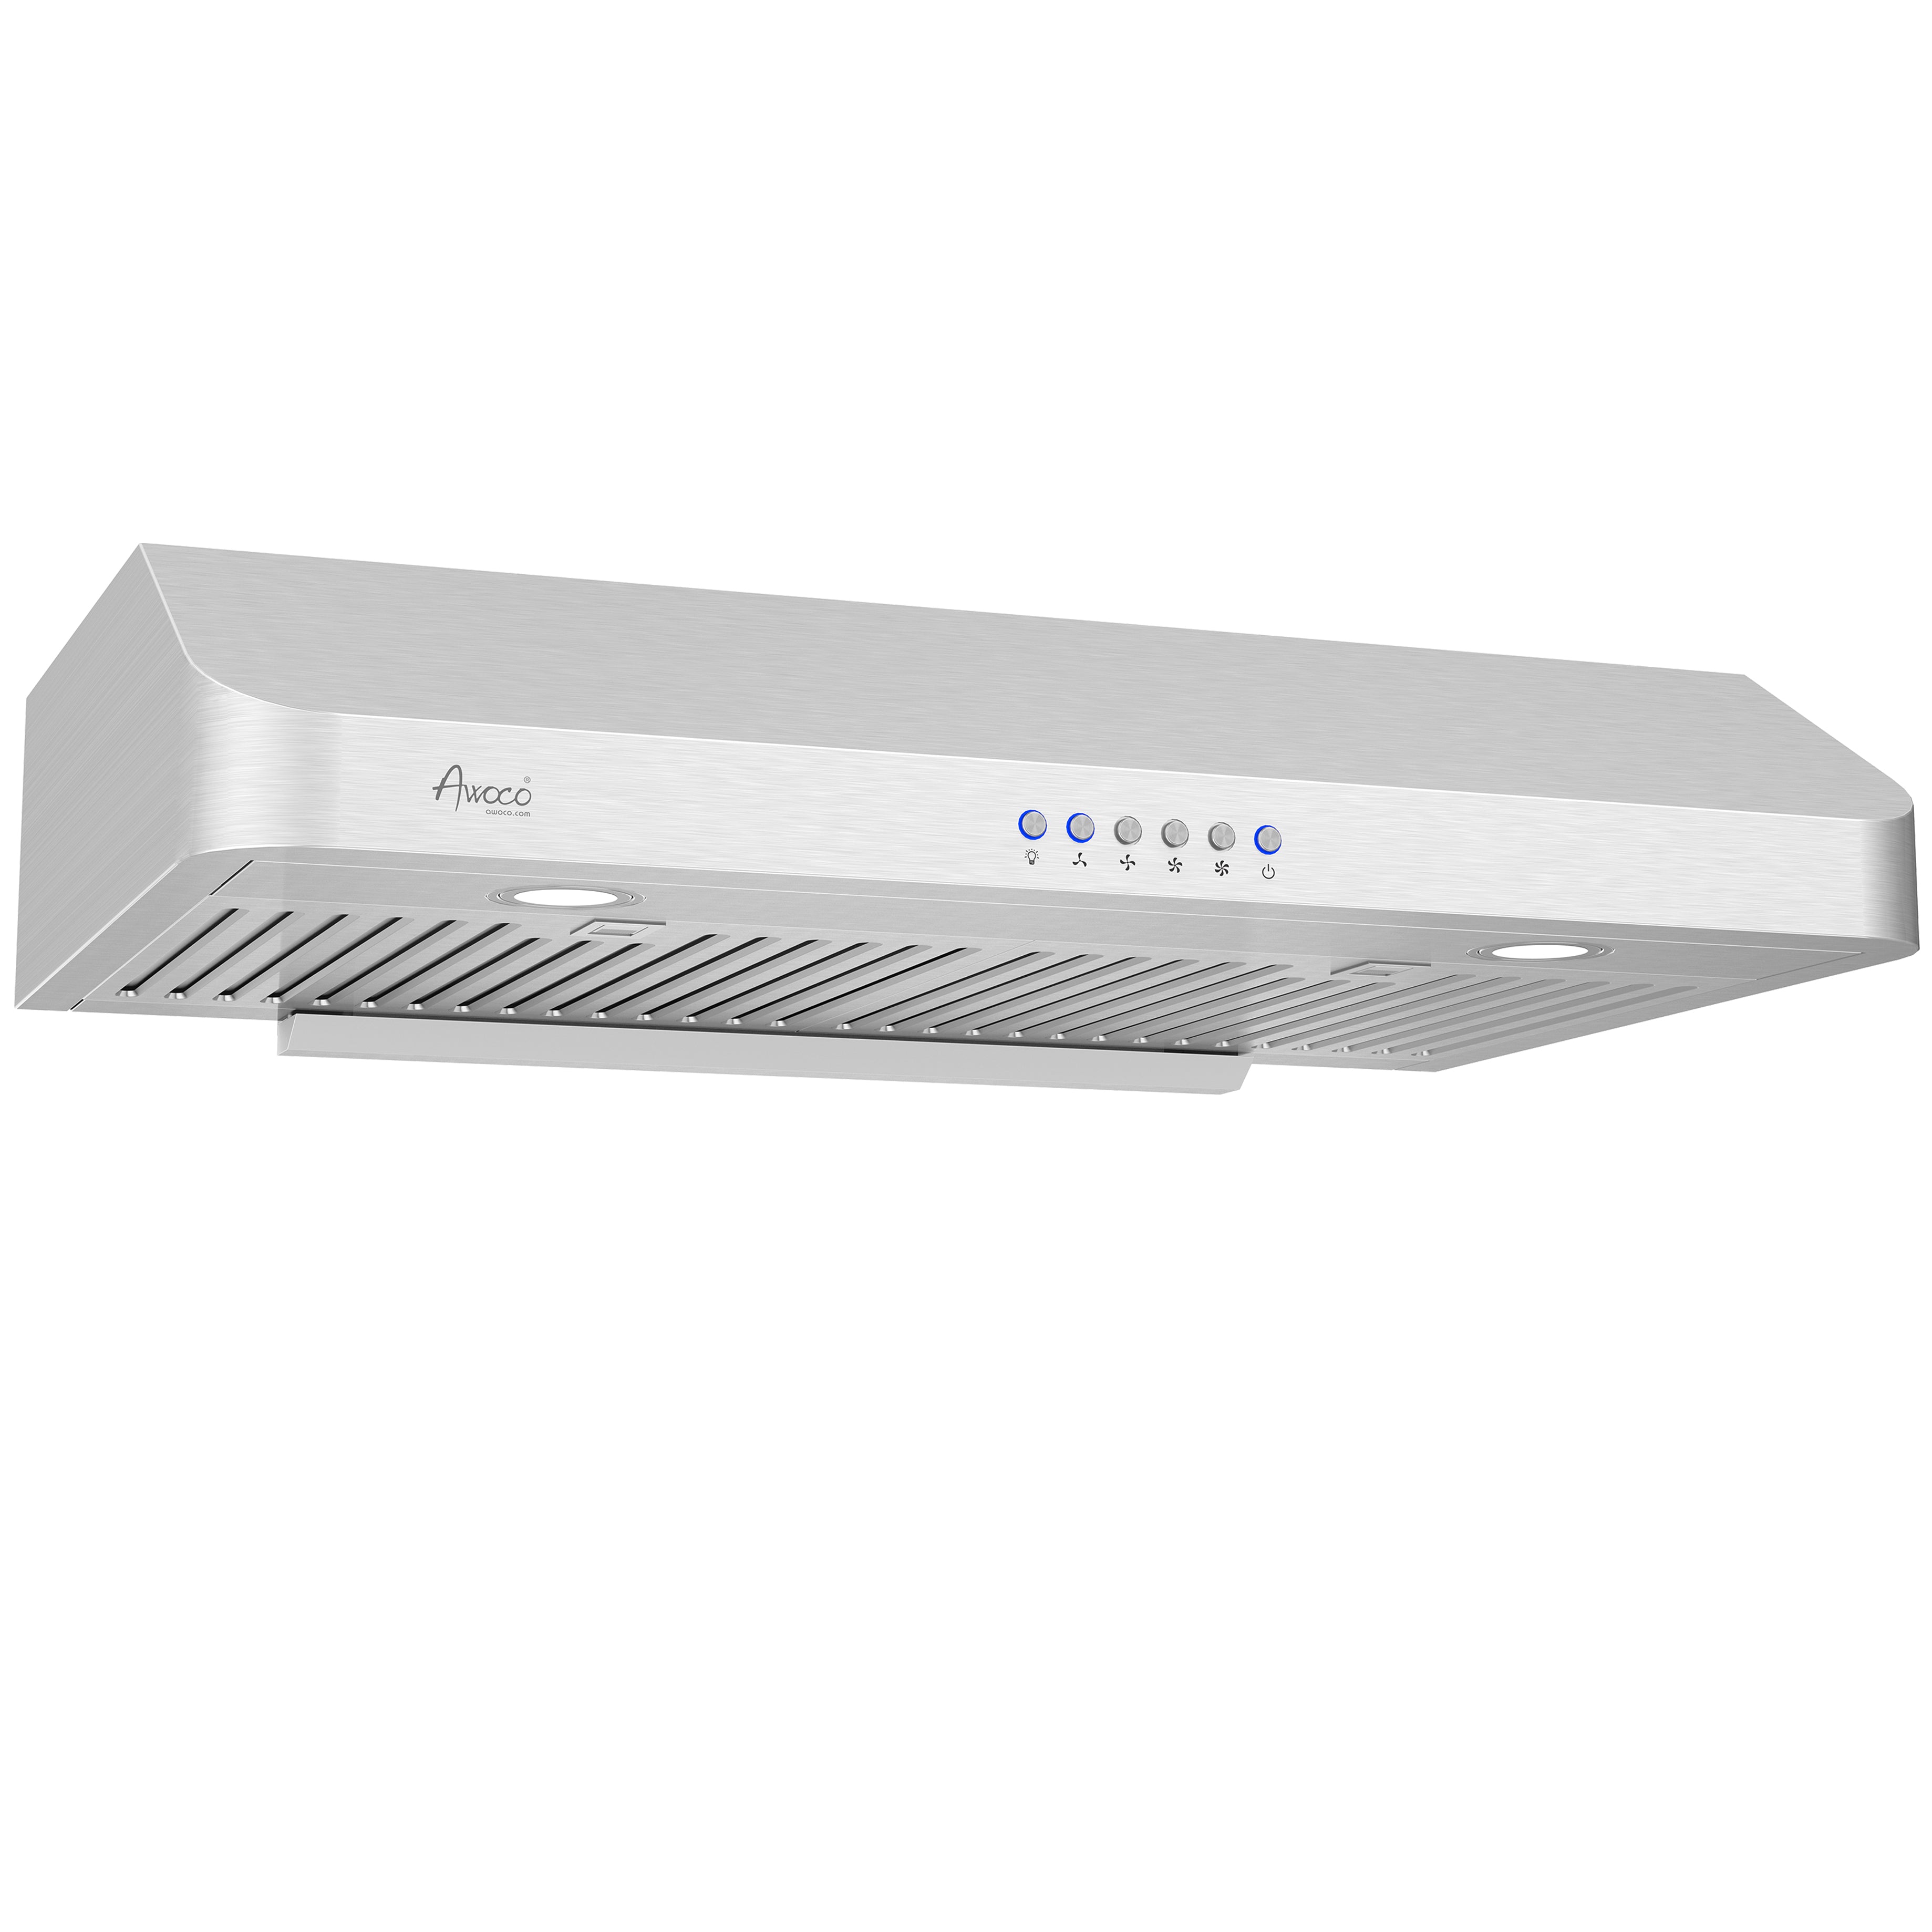 Awoco RH-R06-30 Rectangle Vent 6" High Stainless Steel Under Cabinet 4 Speeds 900CFM Range Hood with LED Lights